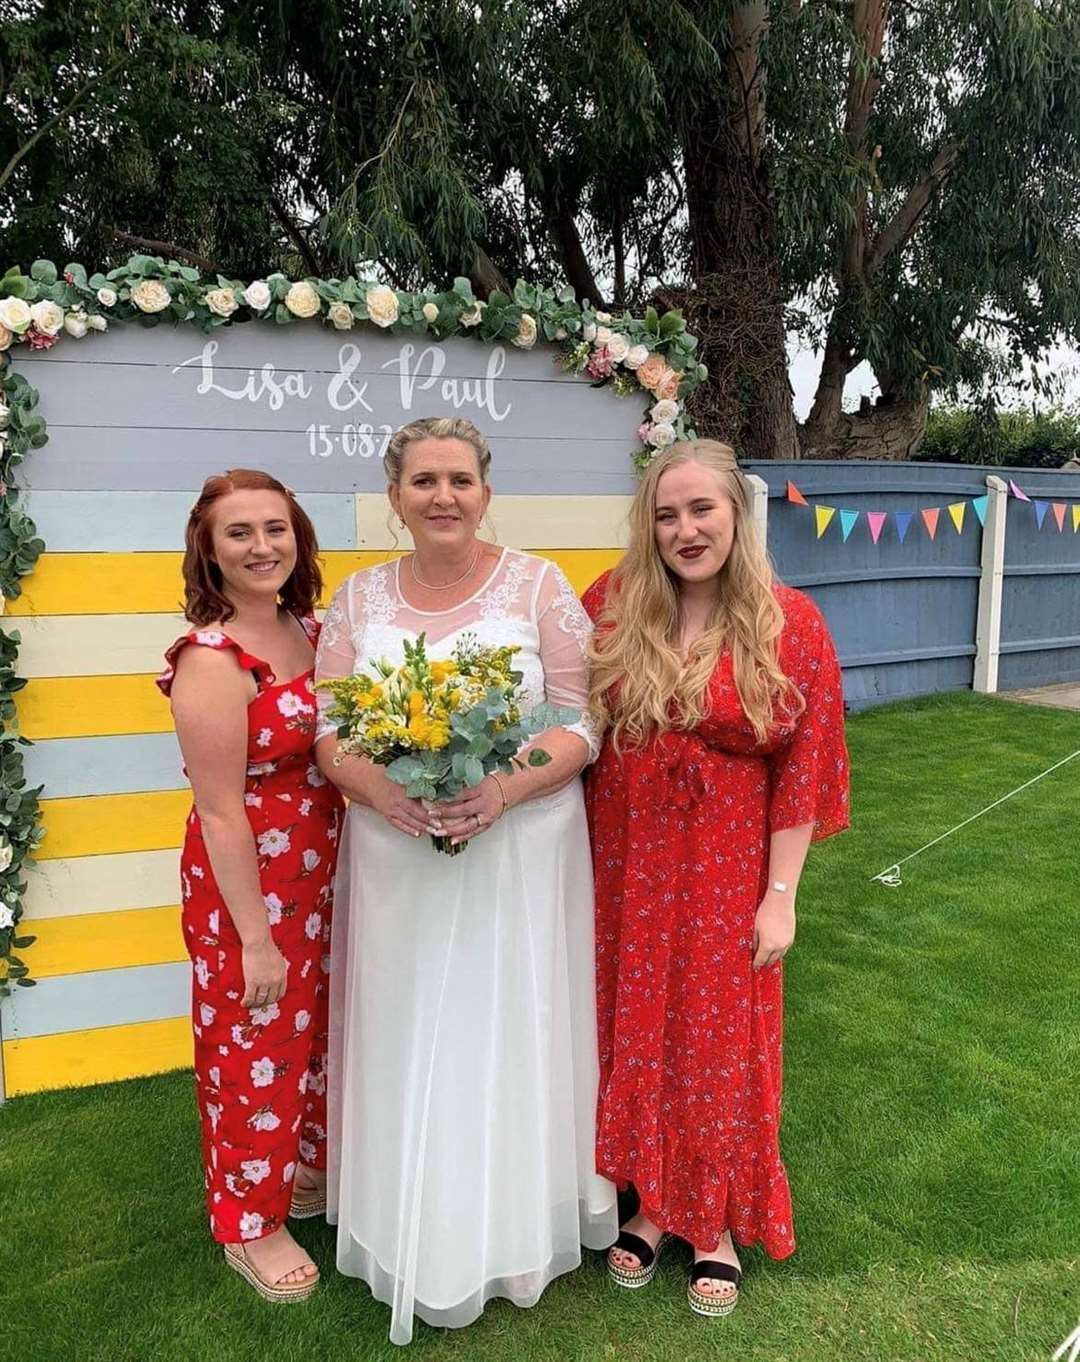 Summer Mace (right) with her sister Jade and mother Lisa